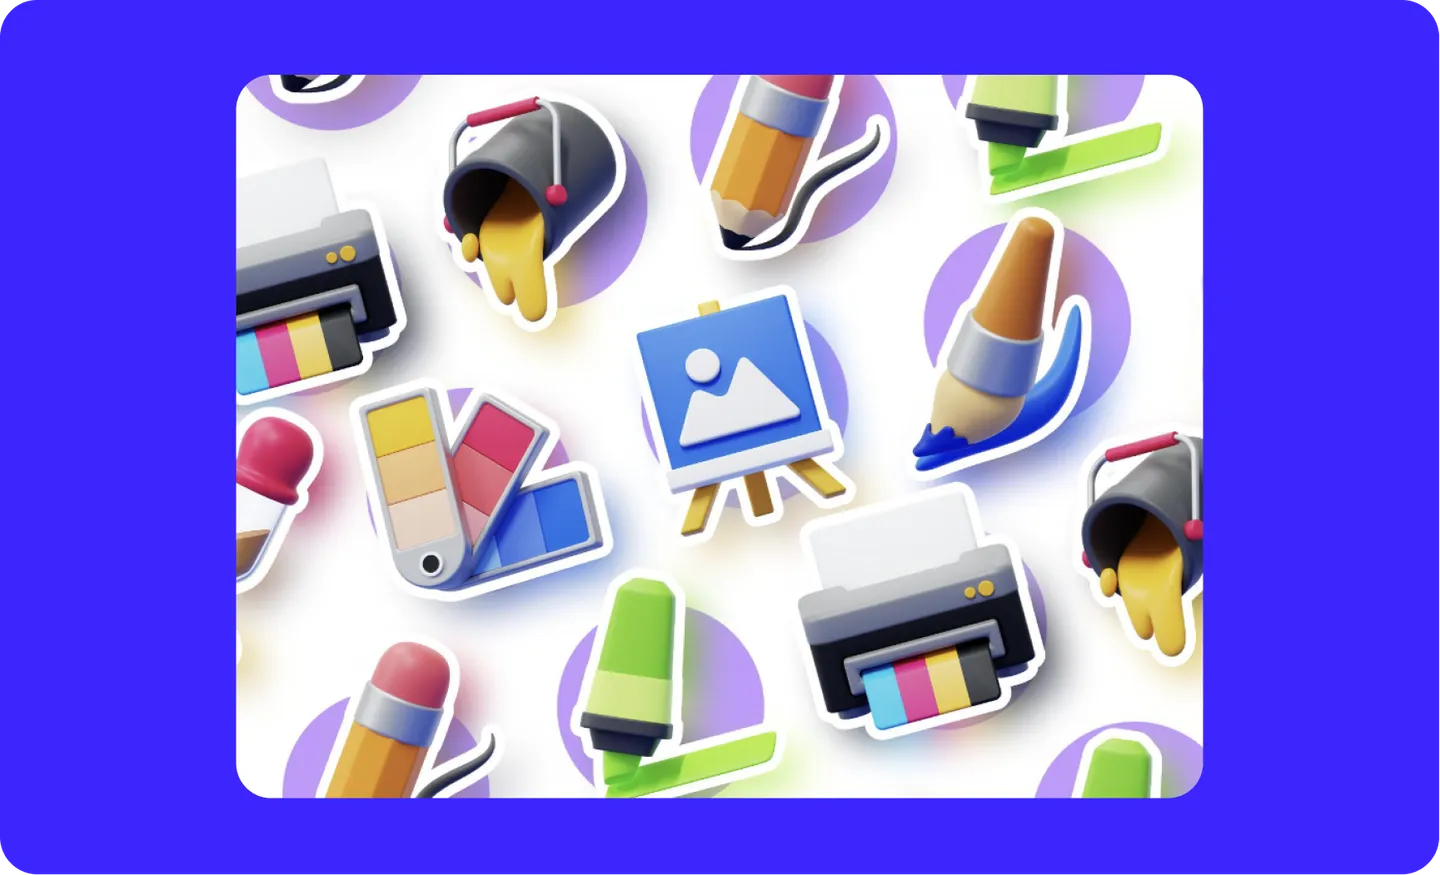 3D icon designs created by Wildan